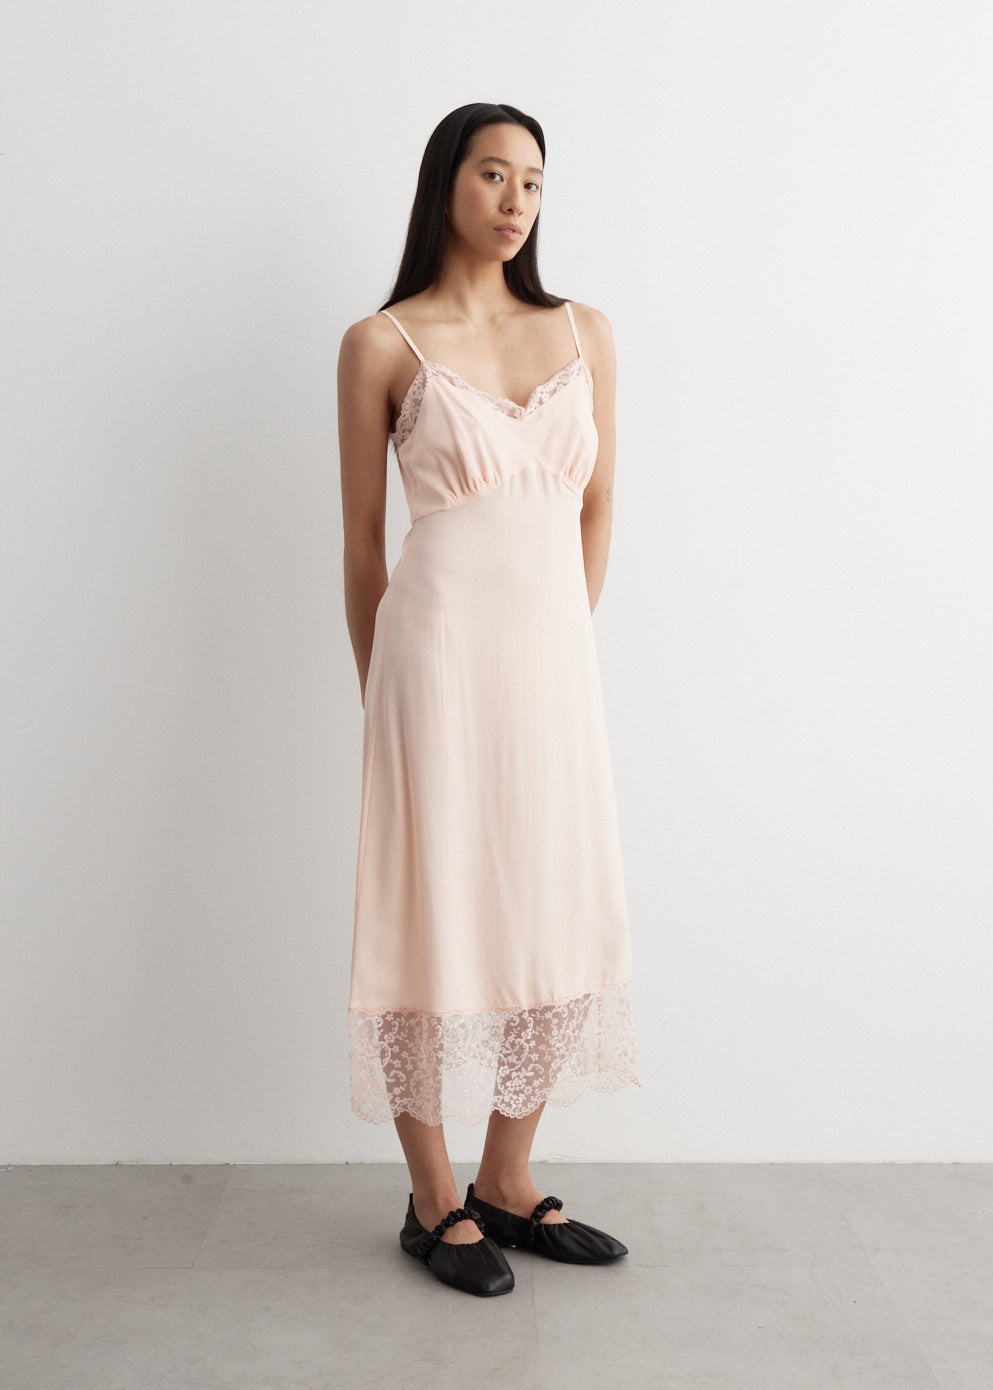 Graphic Slip Dress With Lace Trim